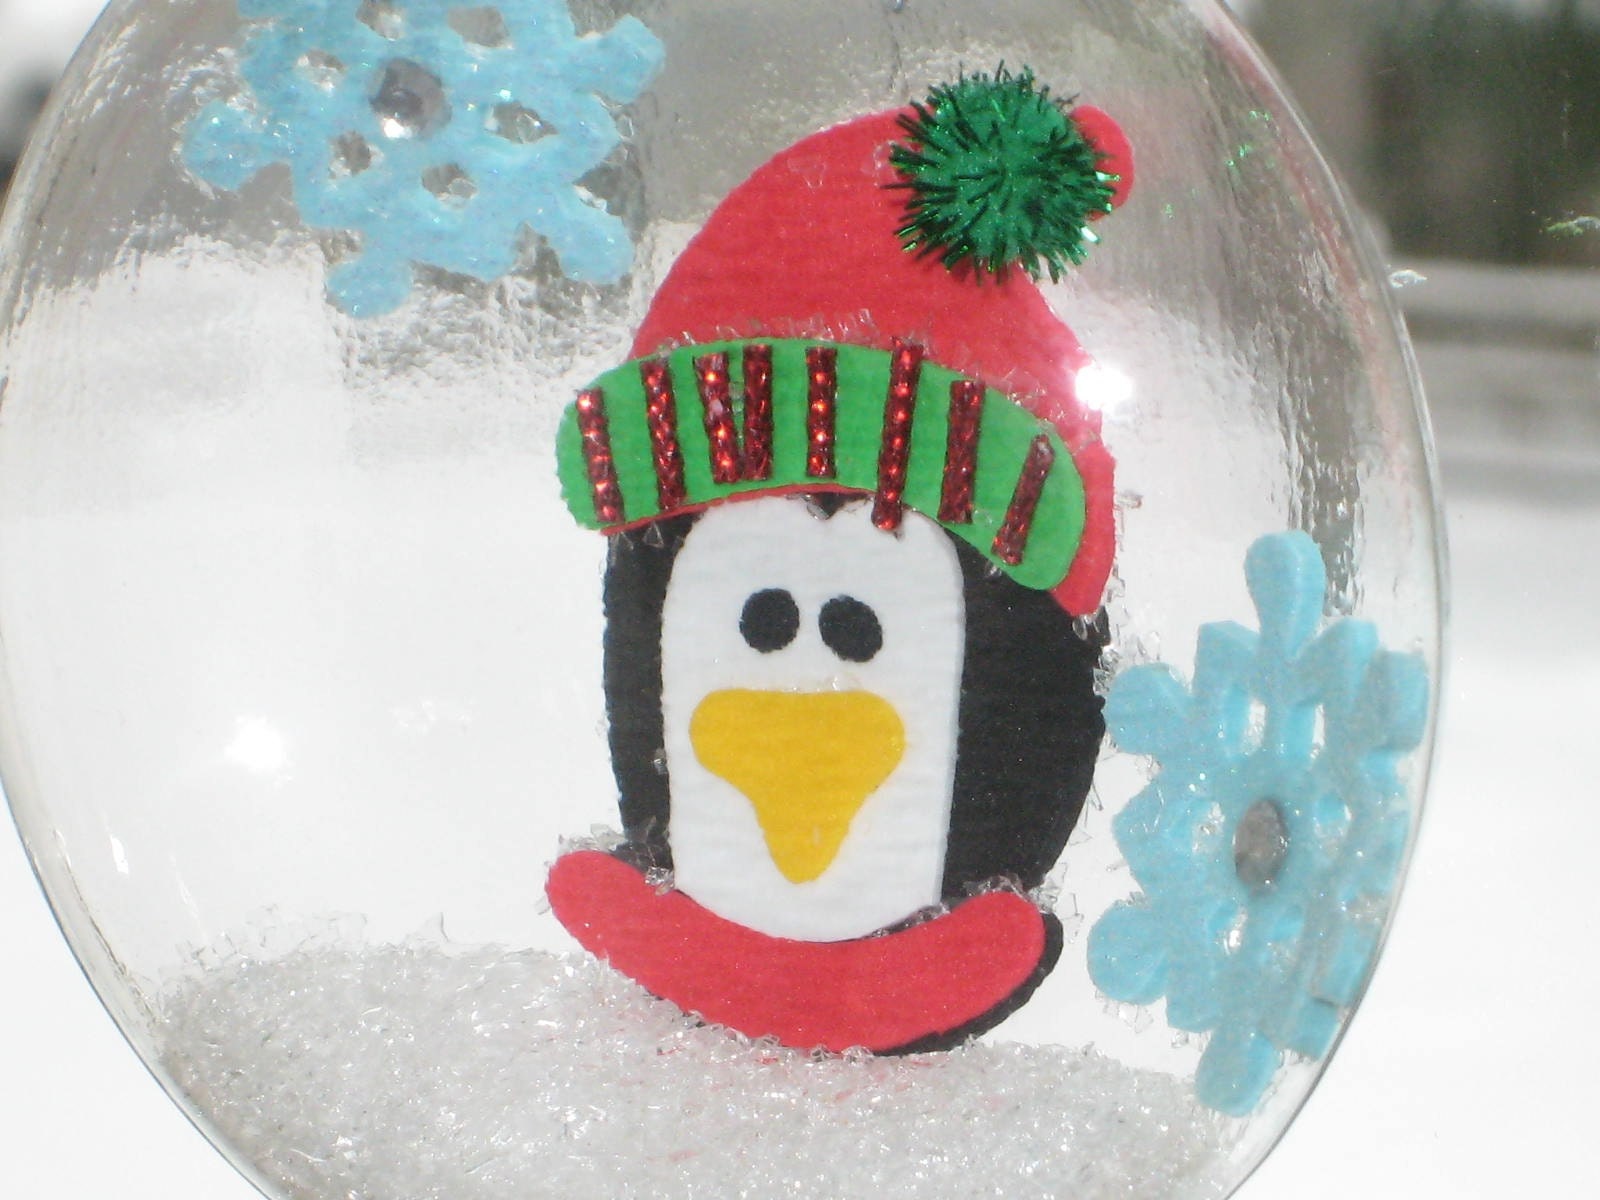 Squashed Snow Globe Glass Tree Ornament - Penguin and Snowflakes  SALE BOGO 1/2 off